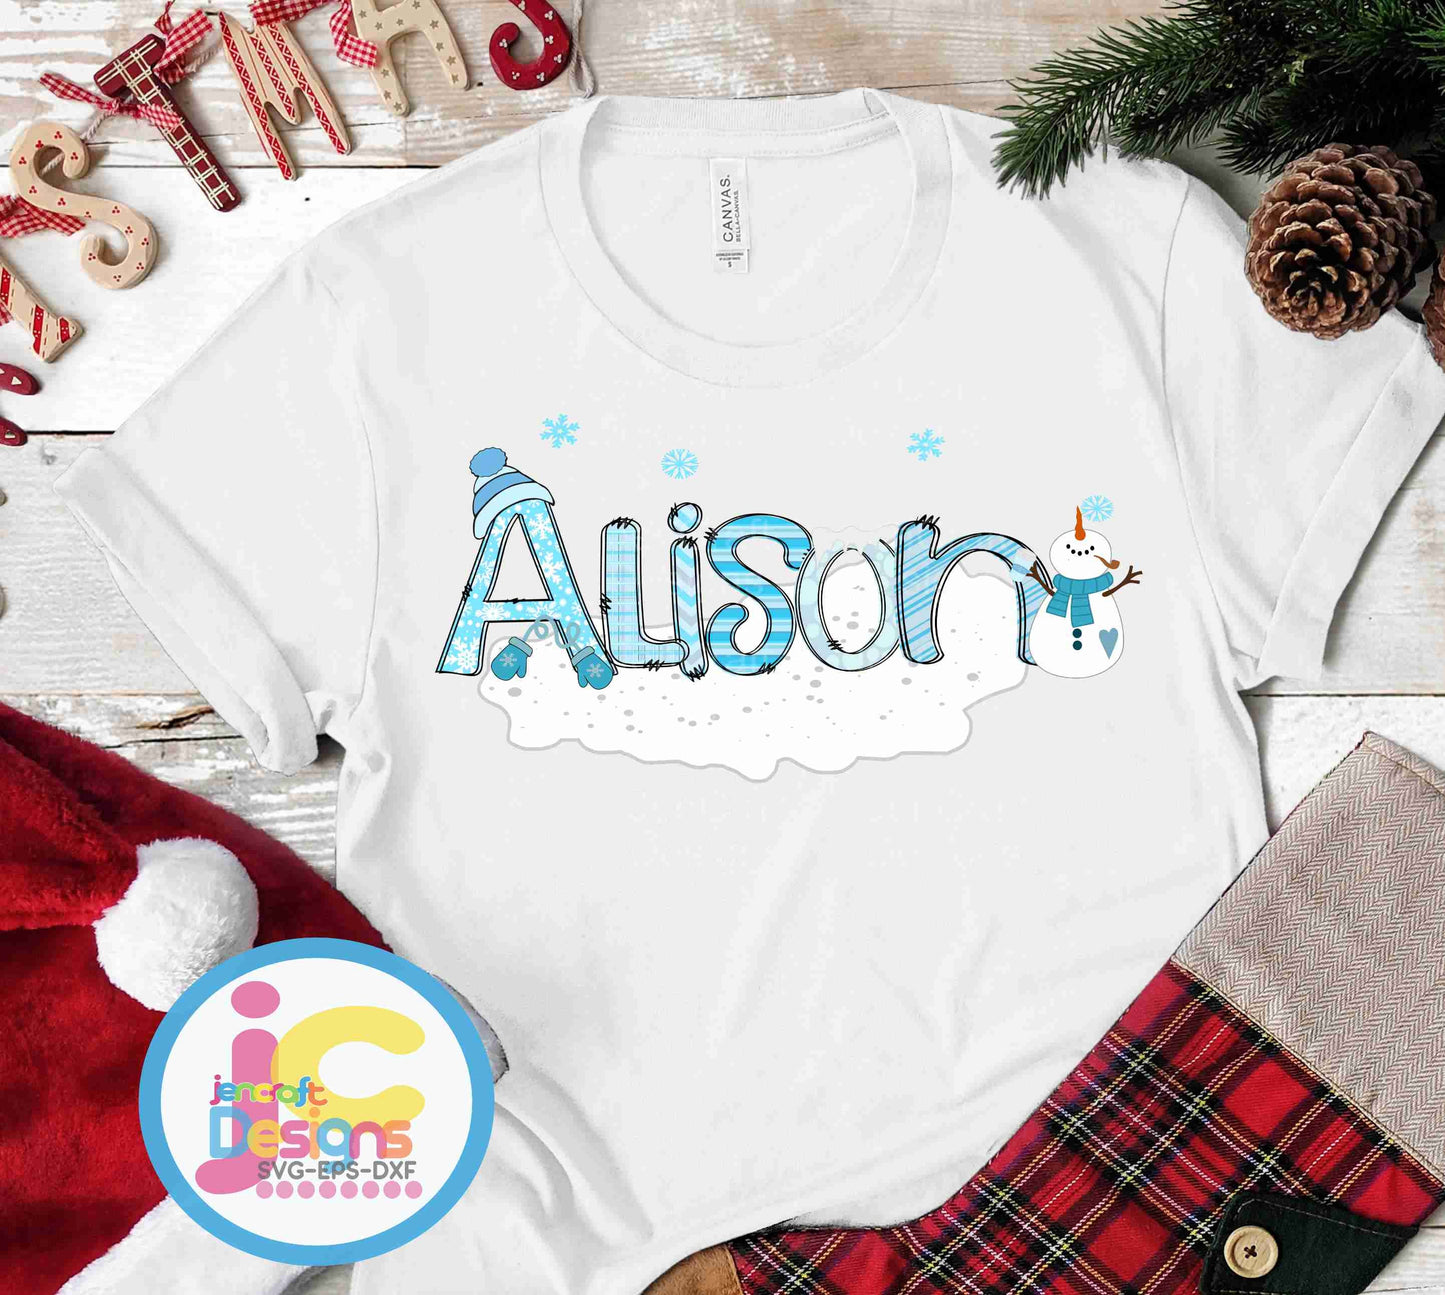 Snowman Christmas Doodle Letters Alphabet Png Print File for Sublimation or Printing - JenCraft Designs